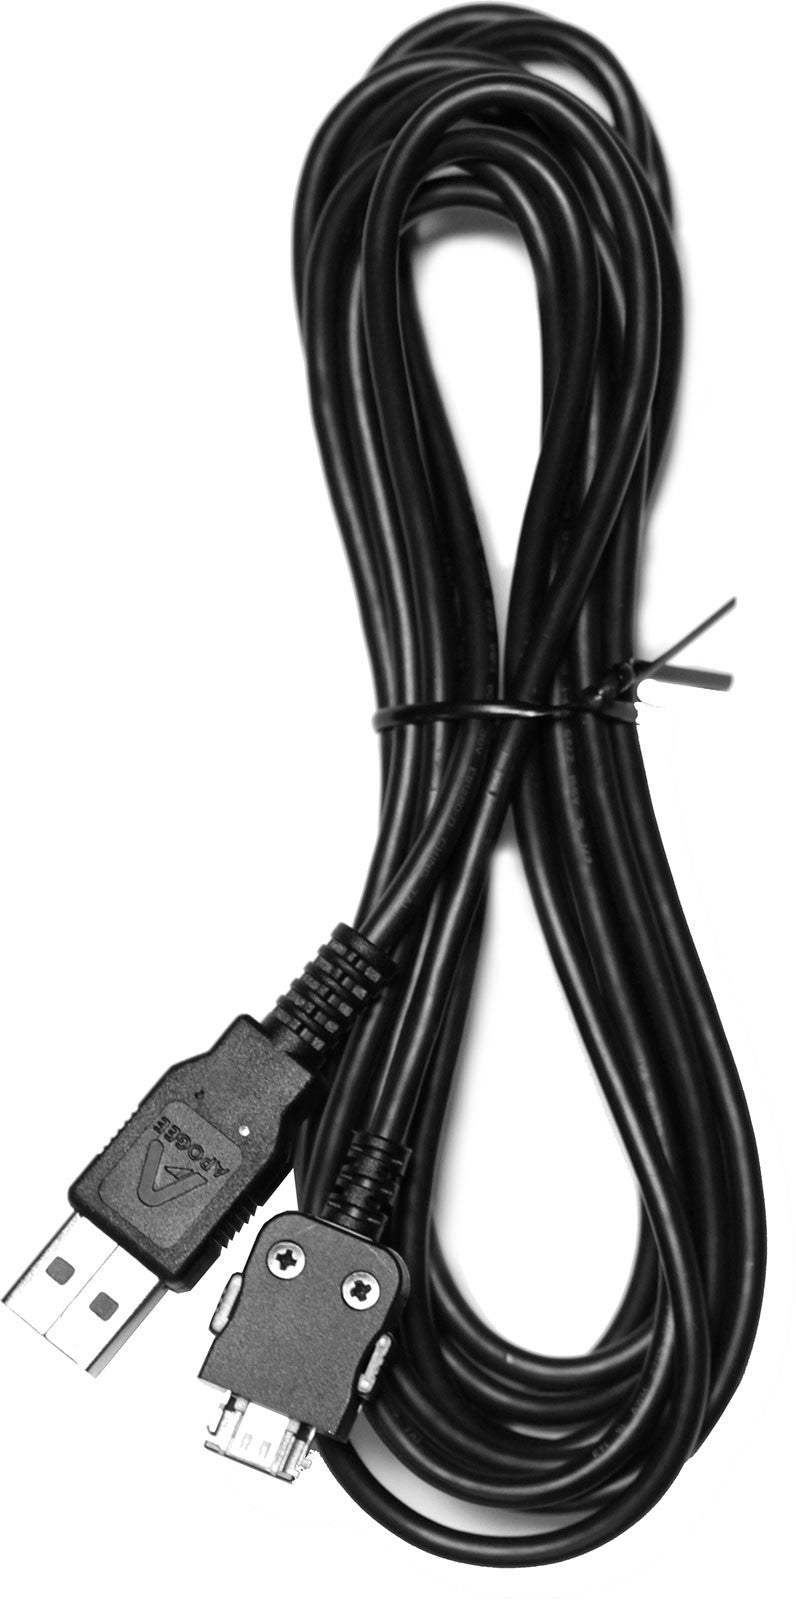 1 meter mac usb cable for apogee jam & michigan